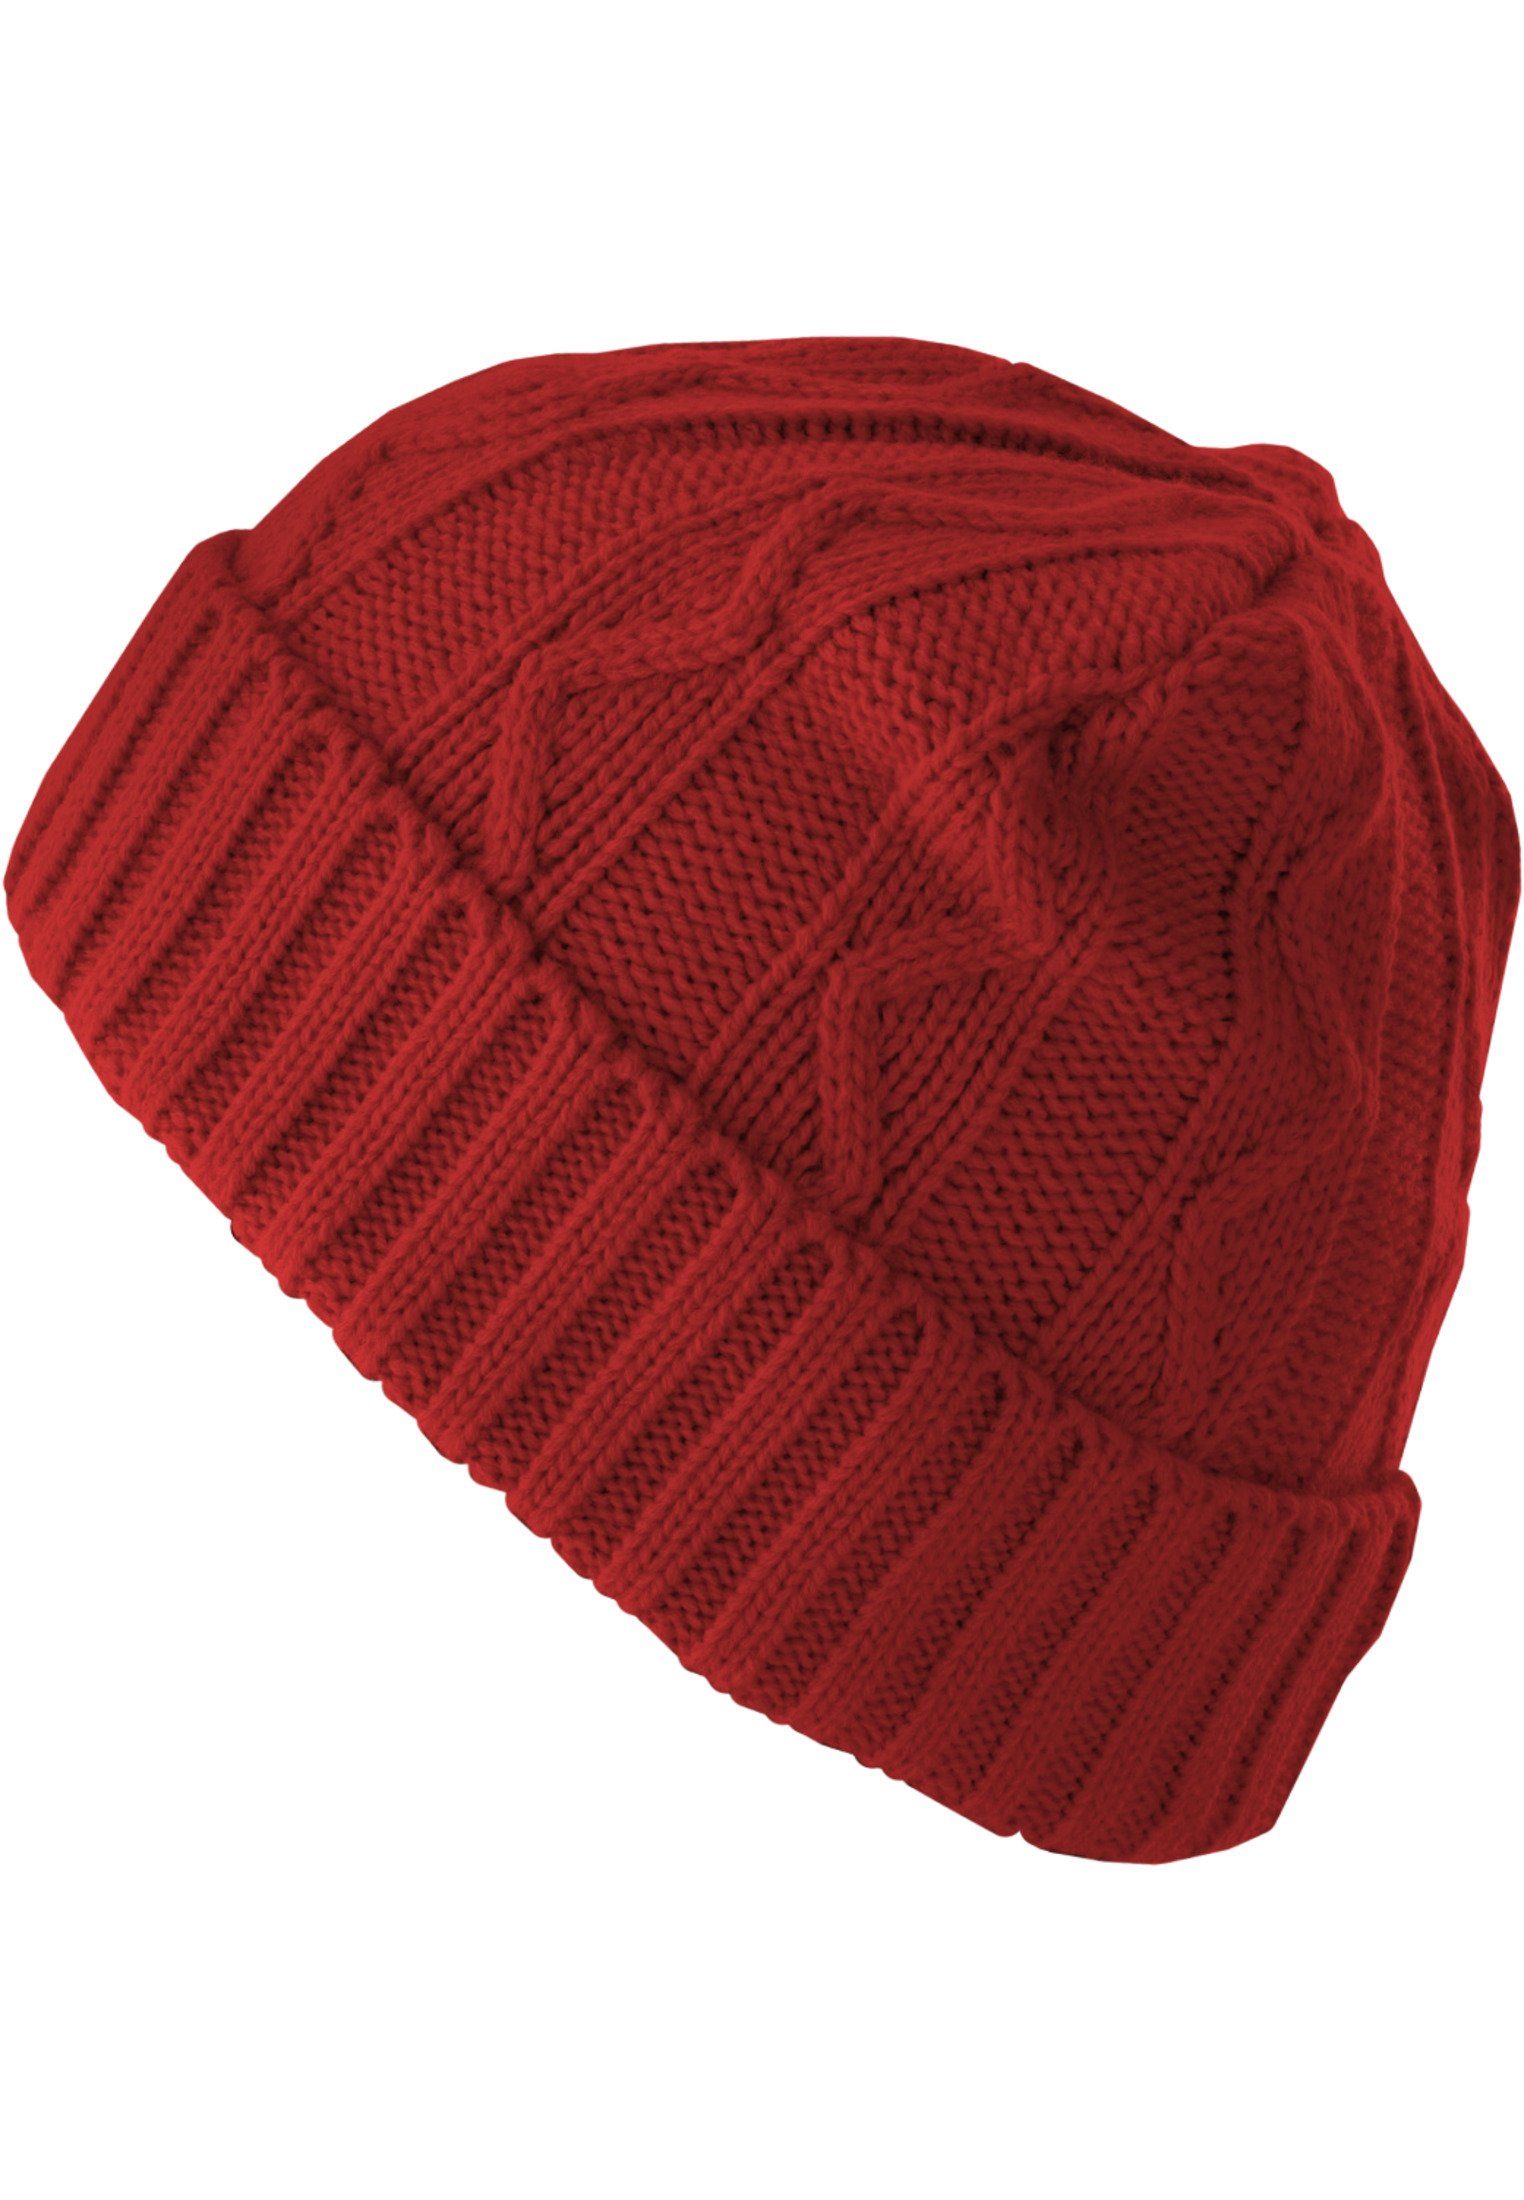 Accessoires MSTRDS Cable red Beanie Beanie Flap (1-St)